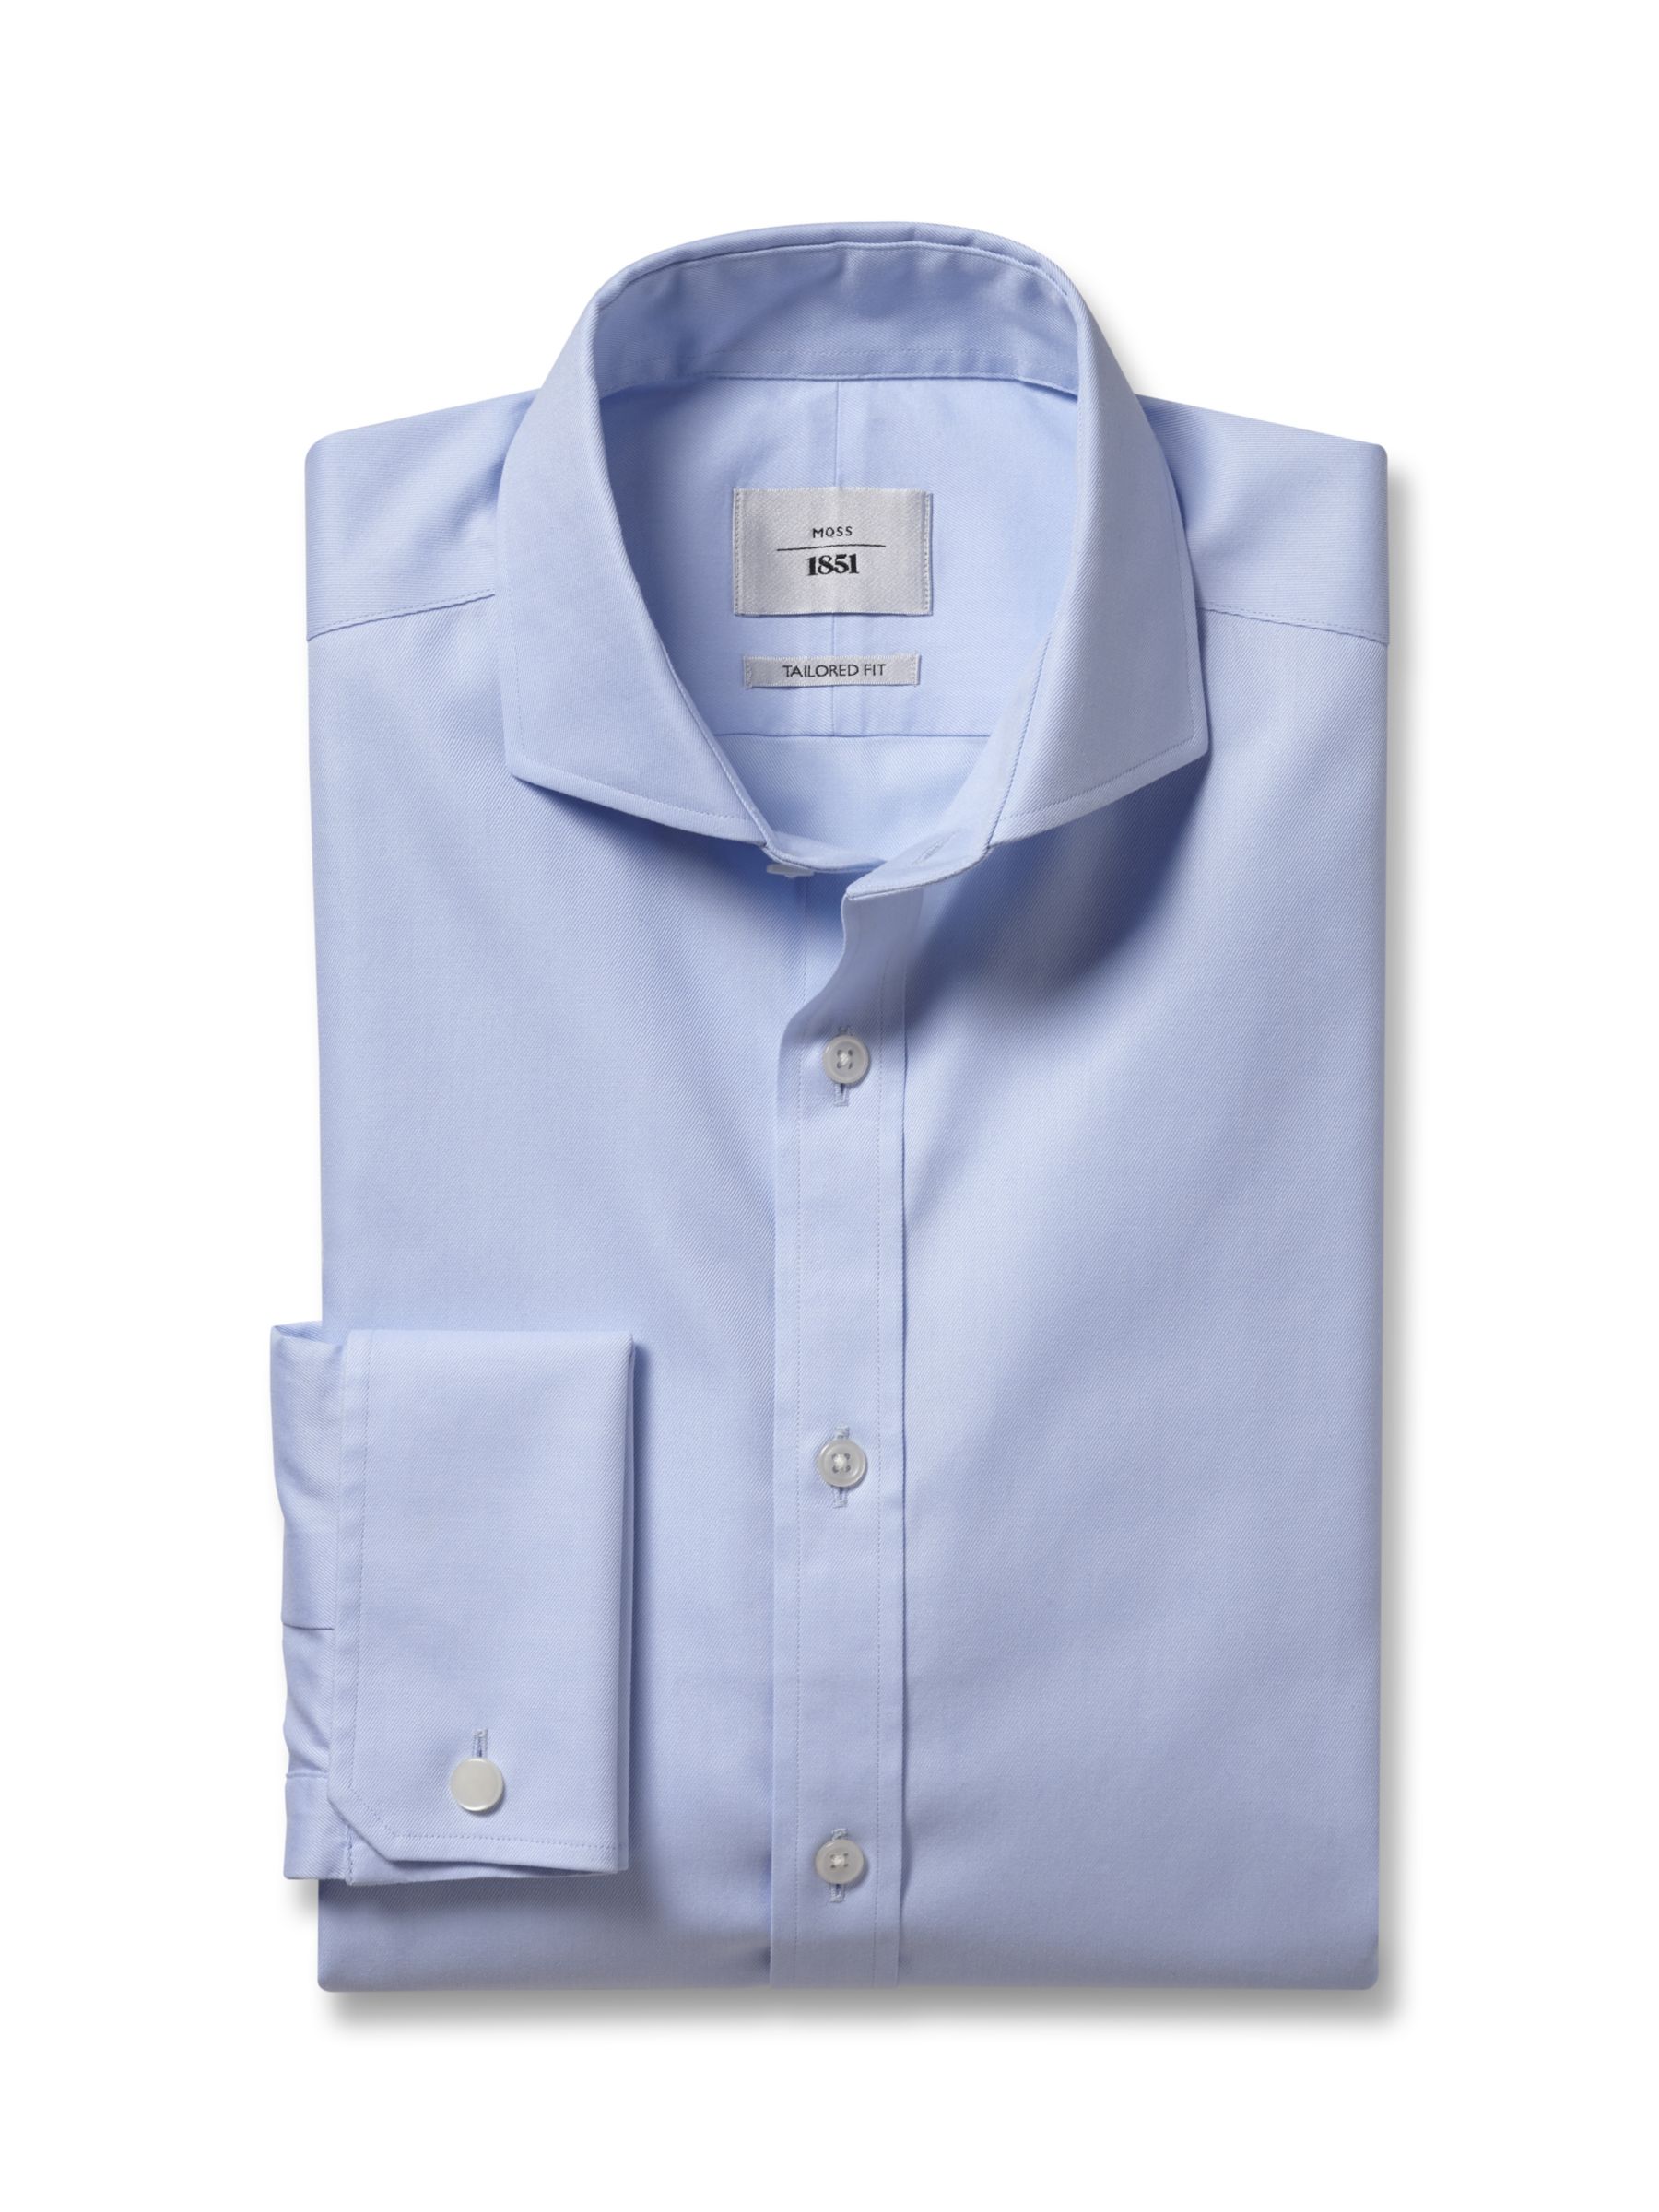 Moss Tailored Fit Double Cuff Non-Iron Twill Shirt, Sky, 14